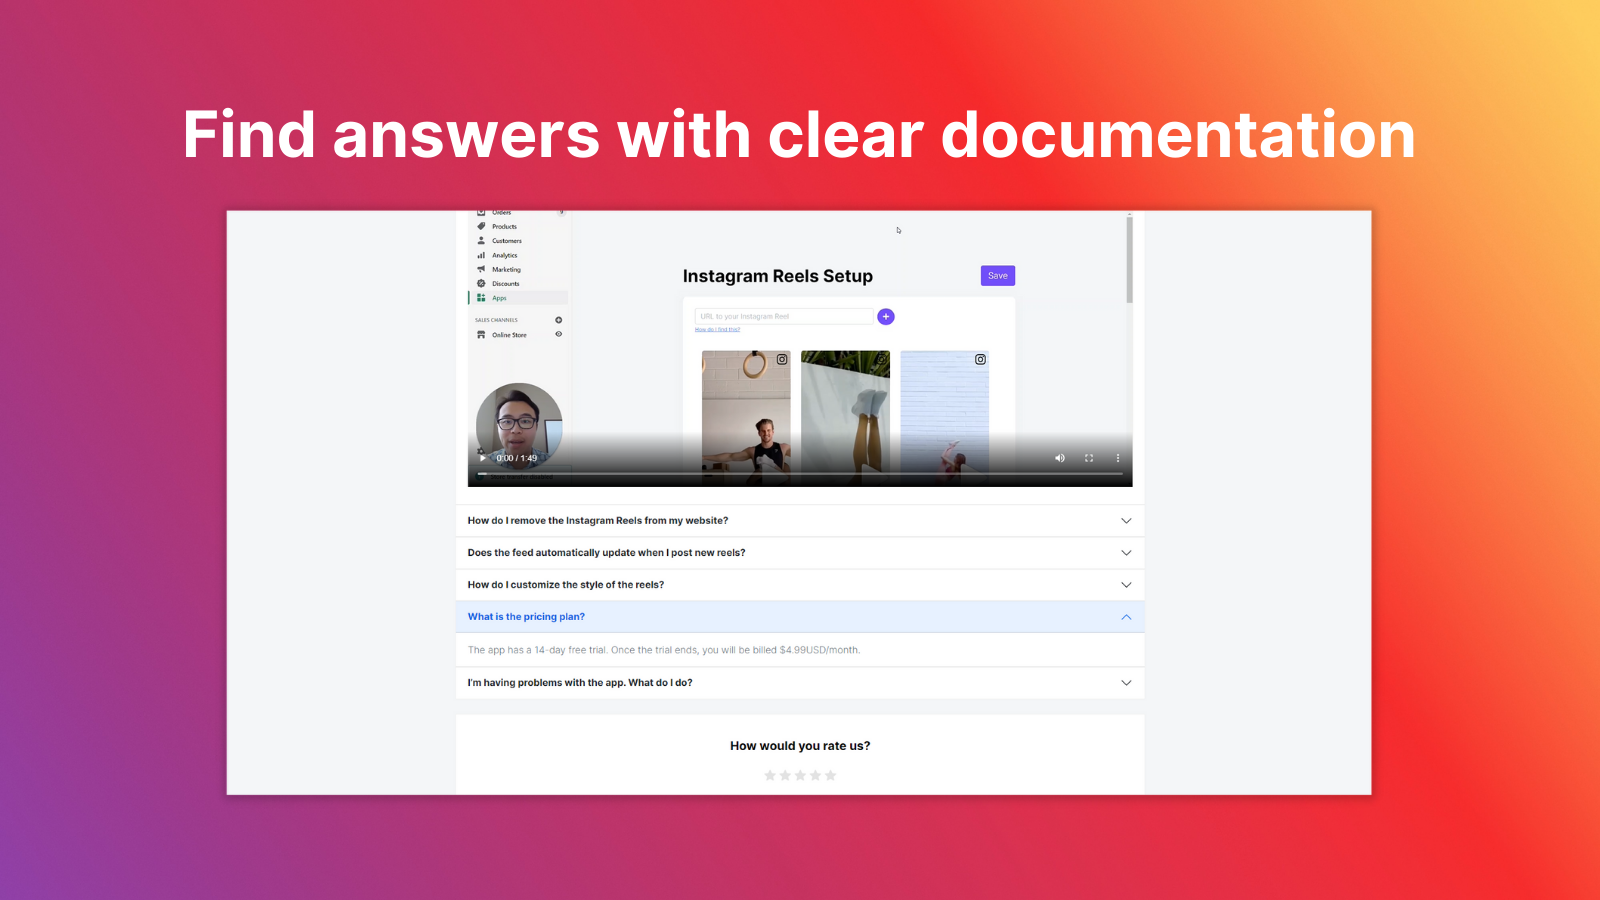 Find answers with clear documentation